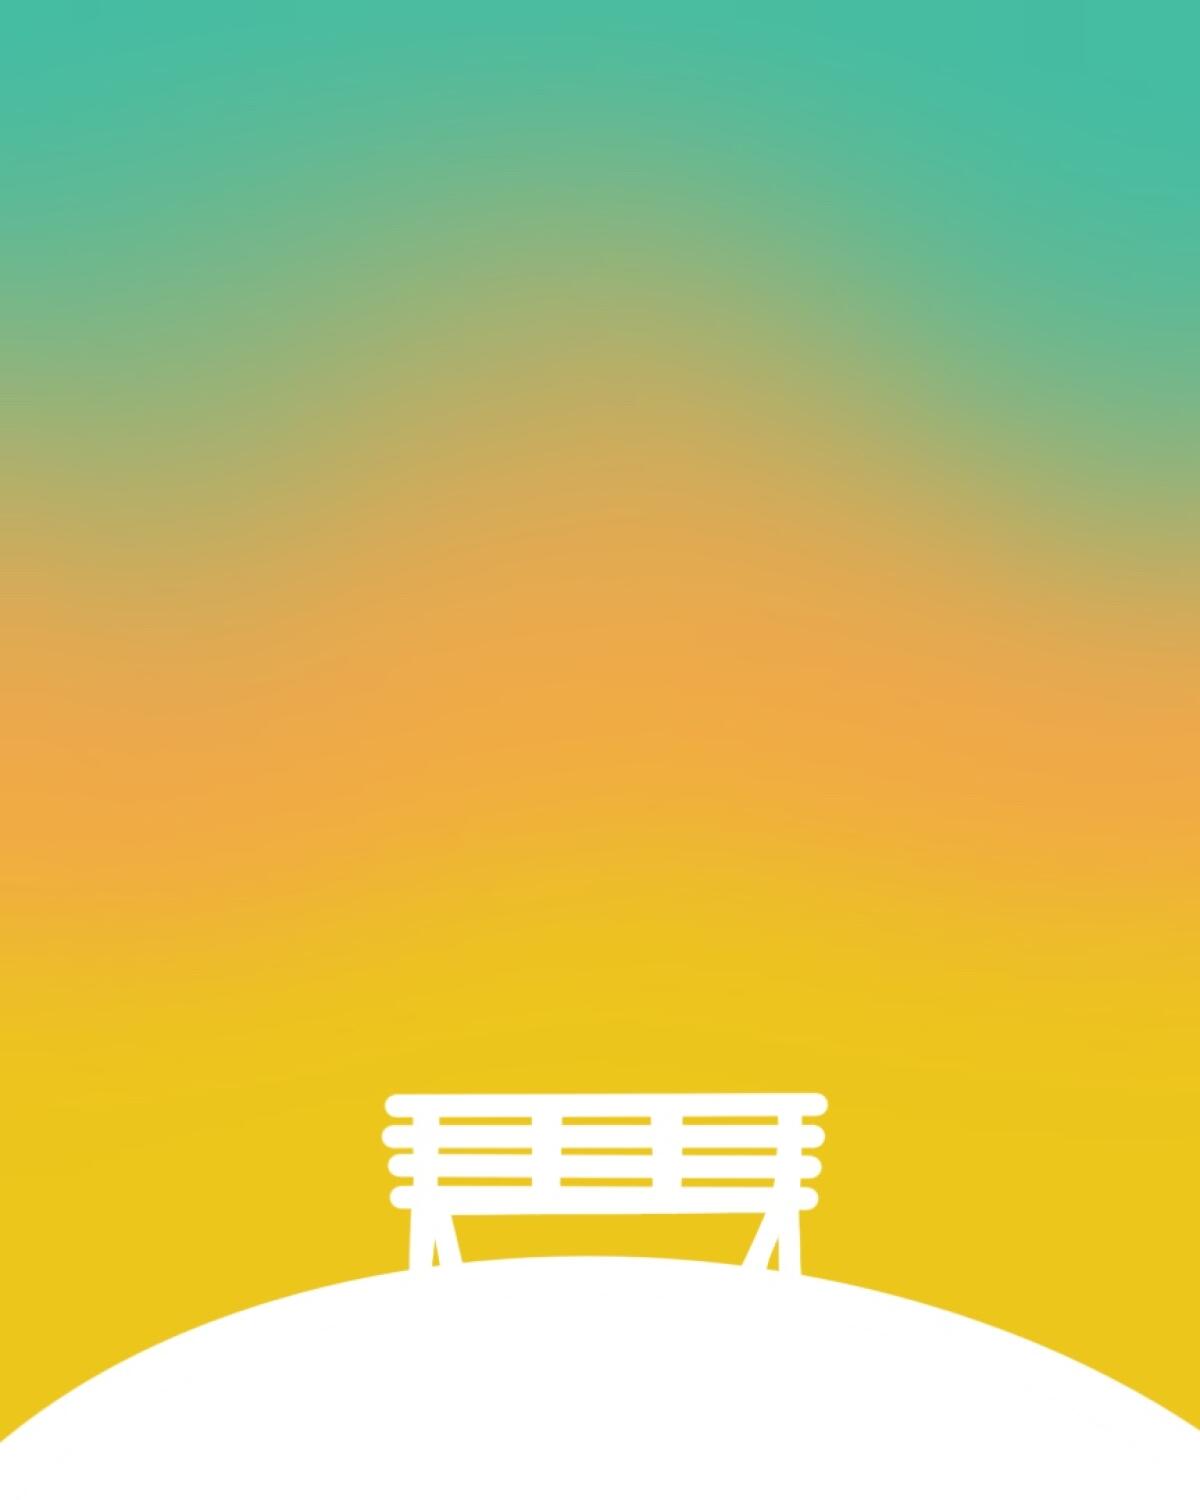 Silhouette of a park bench against a gradient of colors mimicking a sunrise.